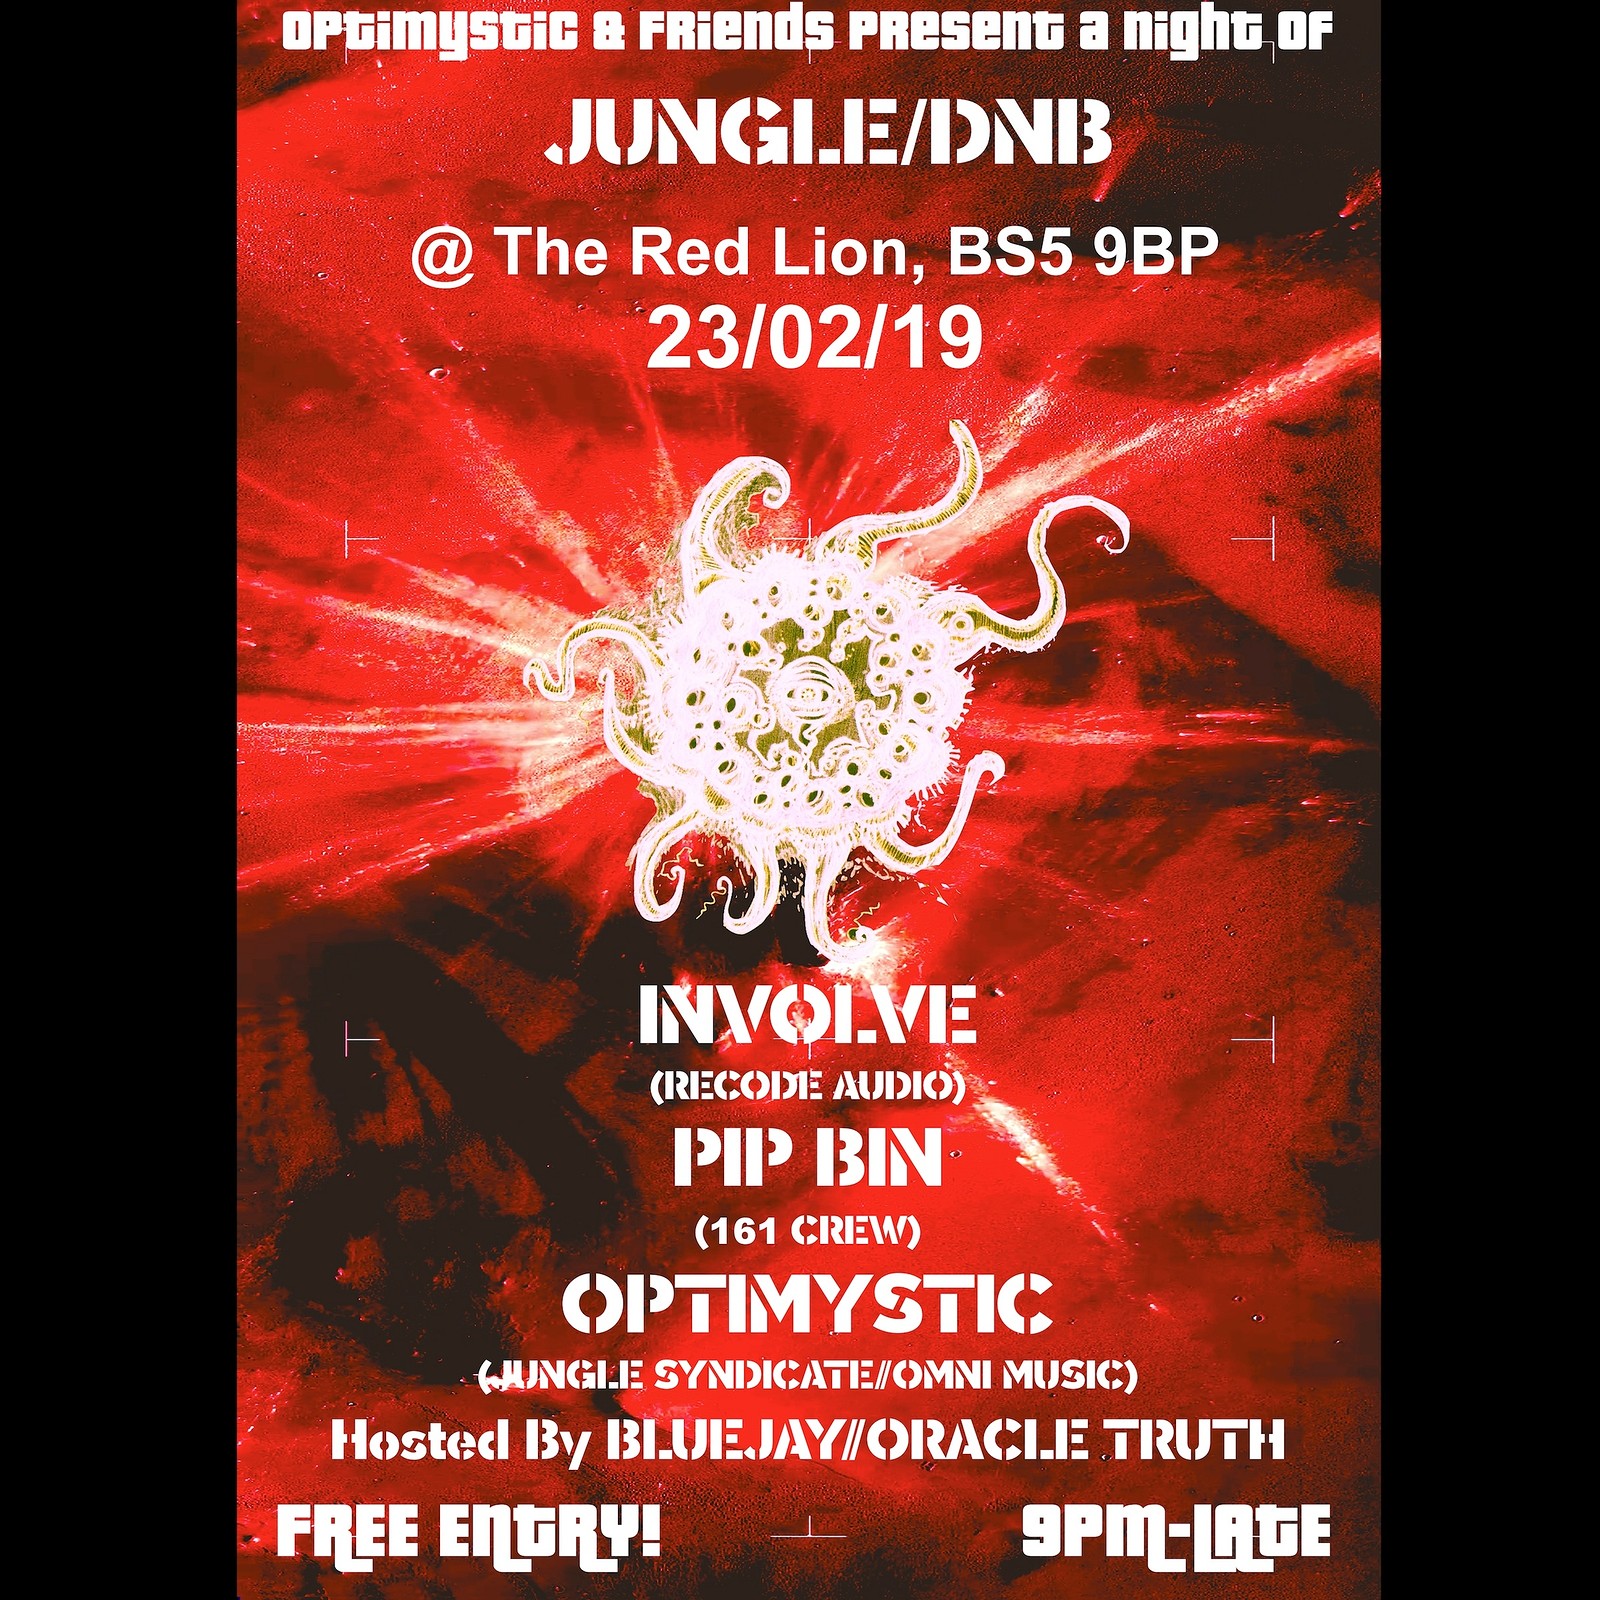 Optimystic & Friends Free Jungle/Dnb Session 17 at The Red Lion BS5